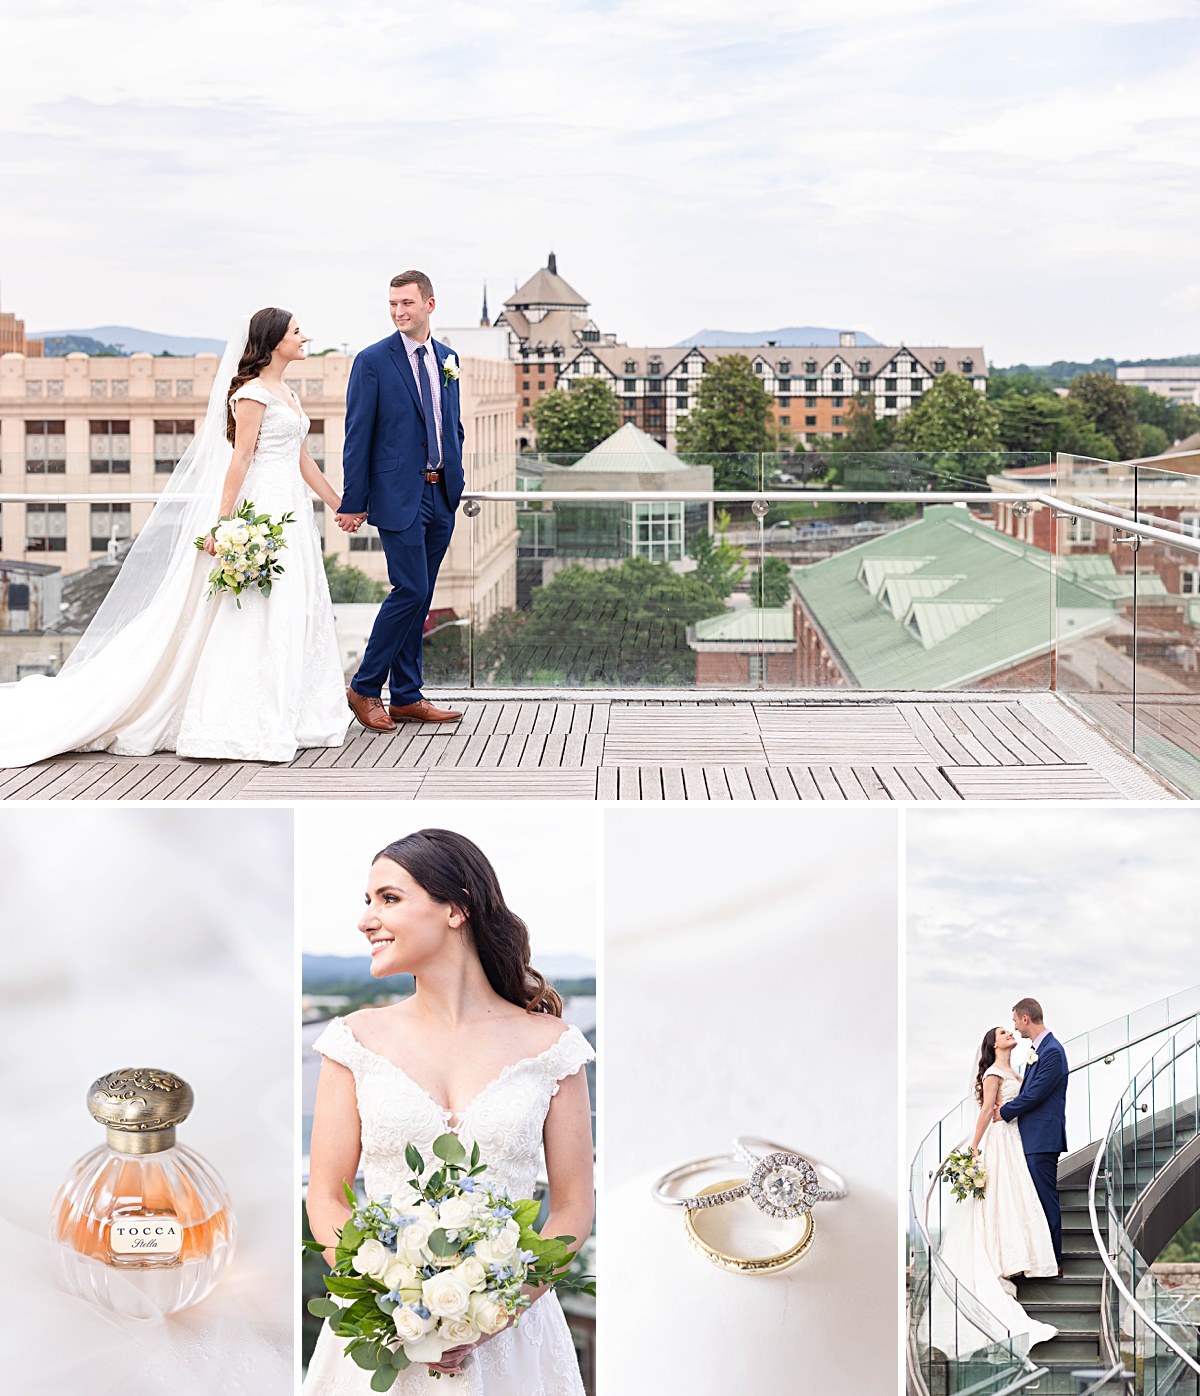 This downtown Roanoke Virginia wedding features stunning rooftop mountain views, elegant bridal details, and an intimate ceremony.